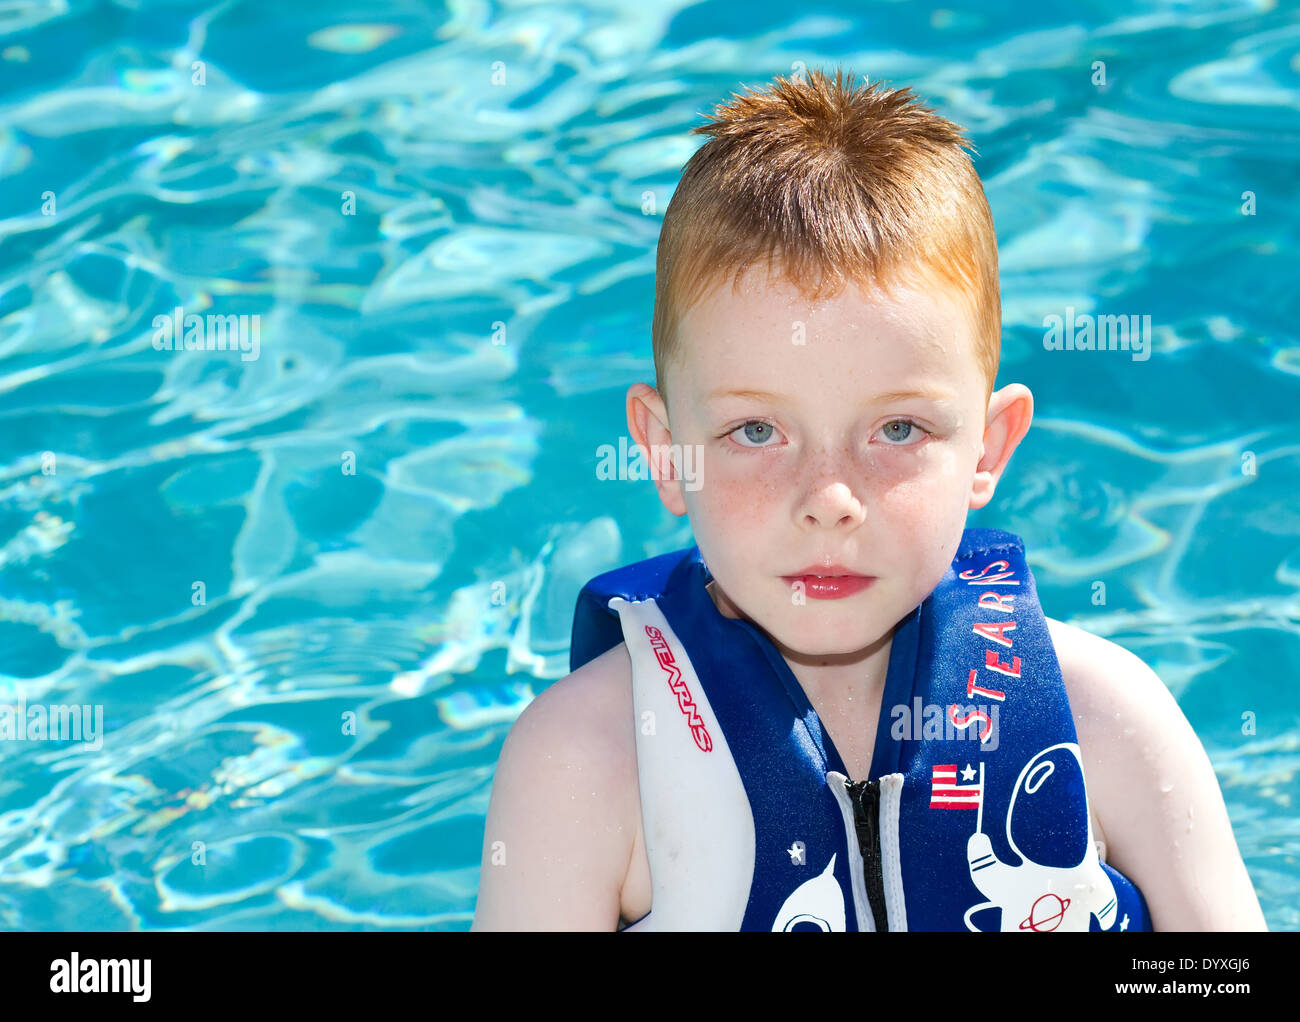 Young Boys Playing In The Swimming Pool Stock Photo 68810622 Alamy